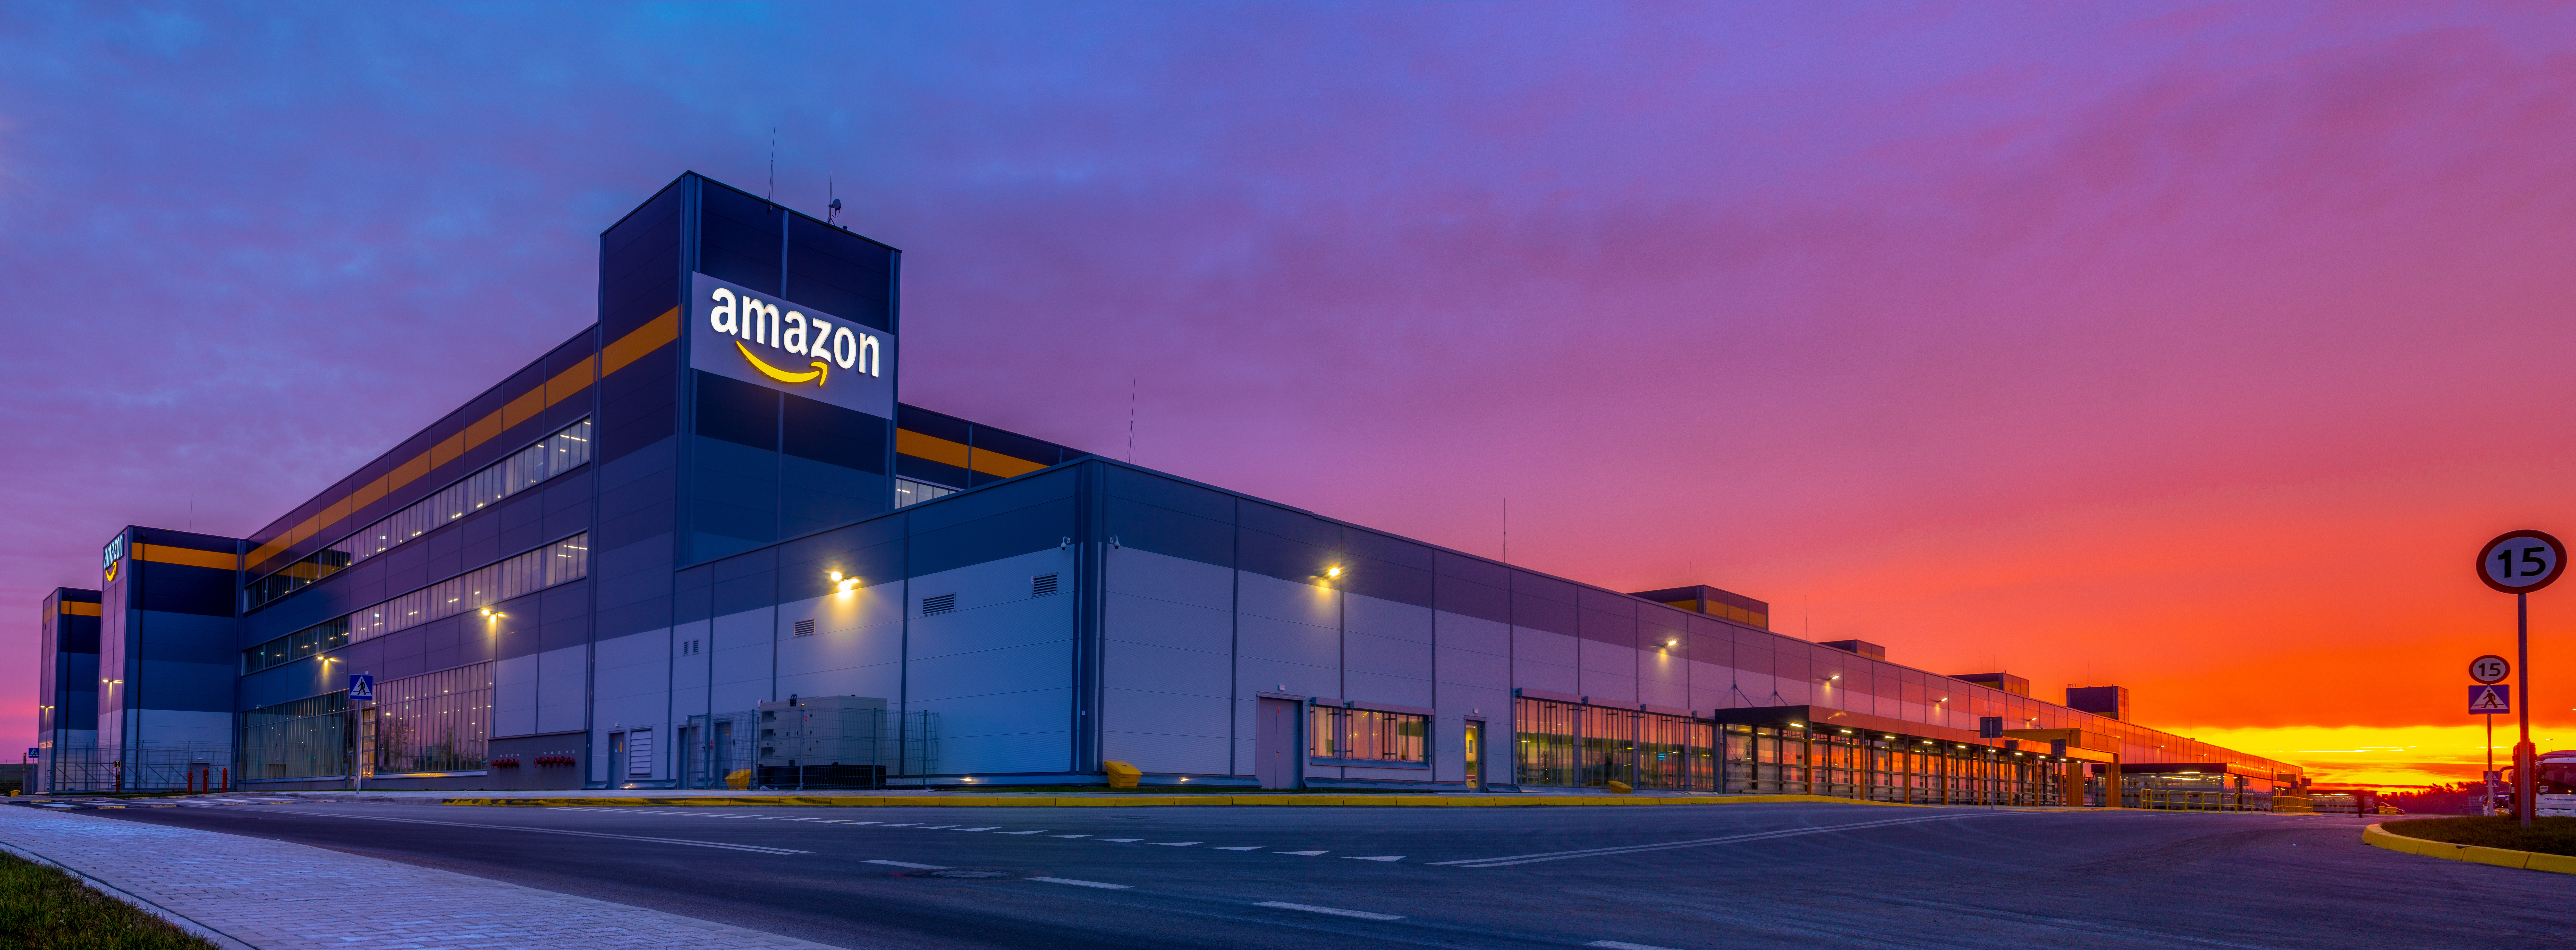 Amazon Coming to Little Rock Port District